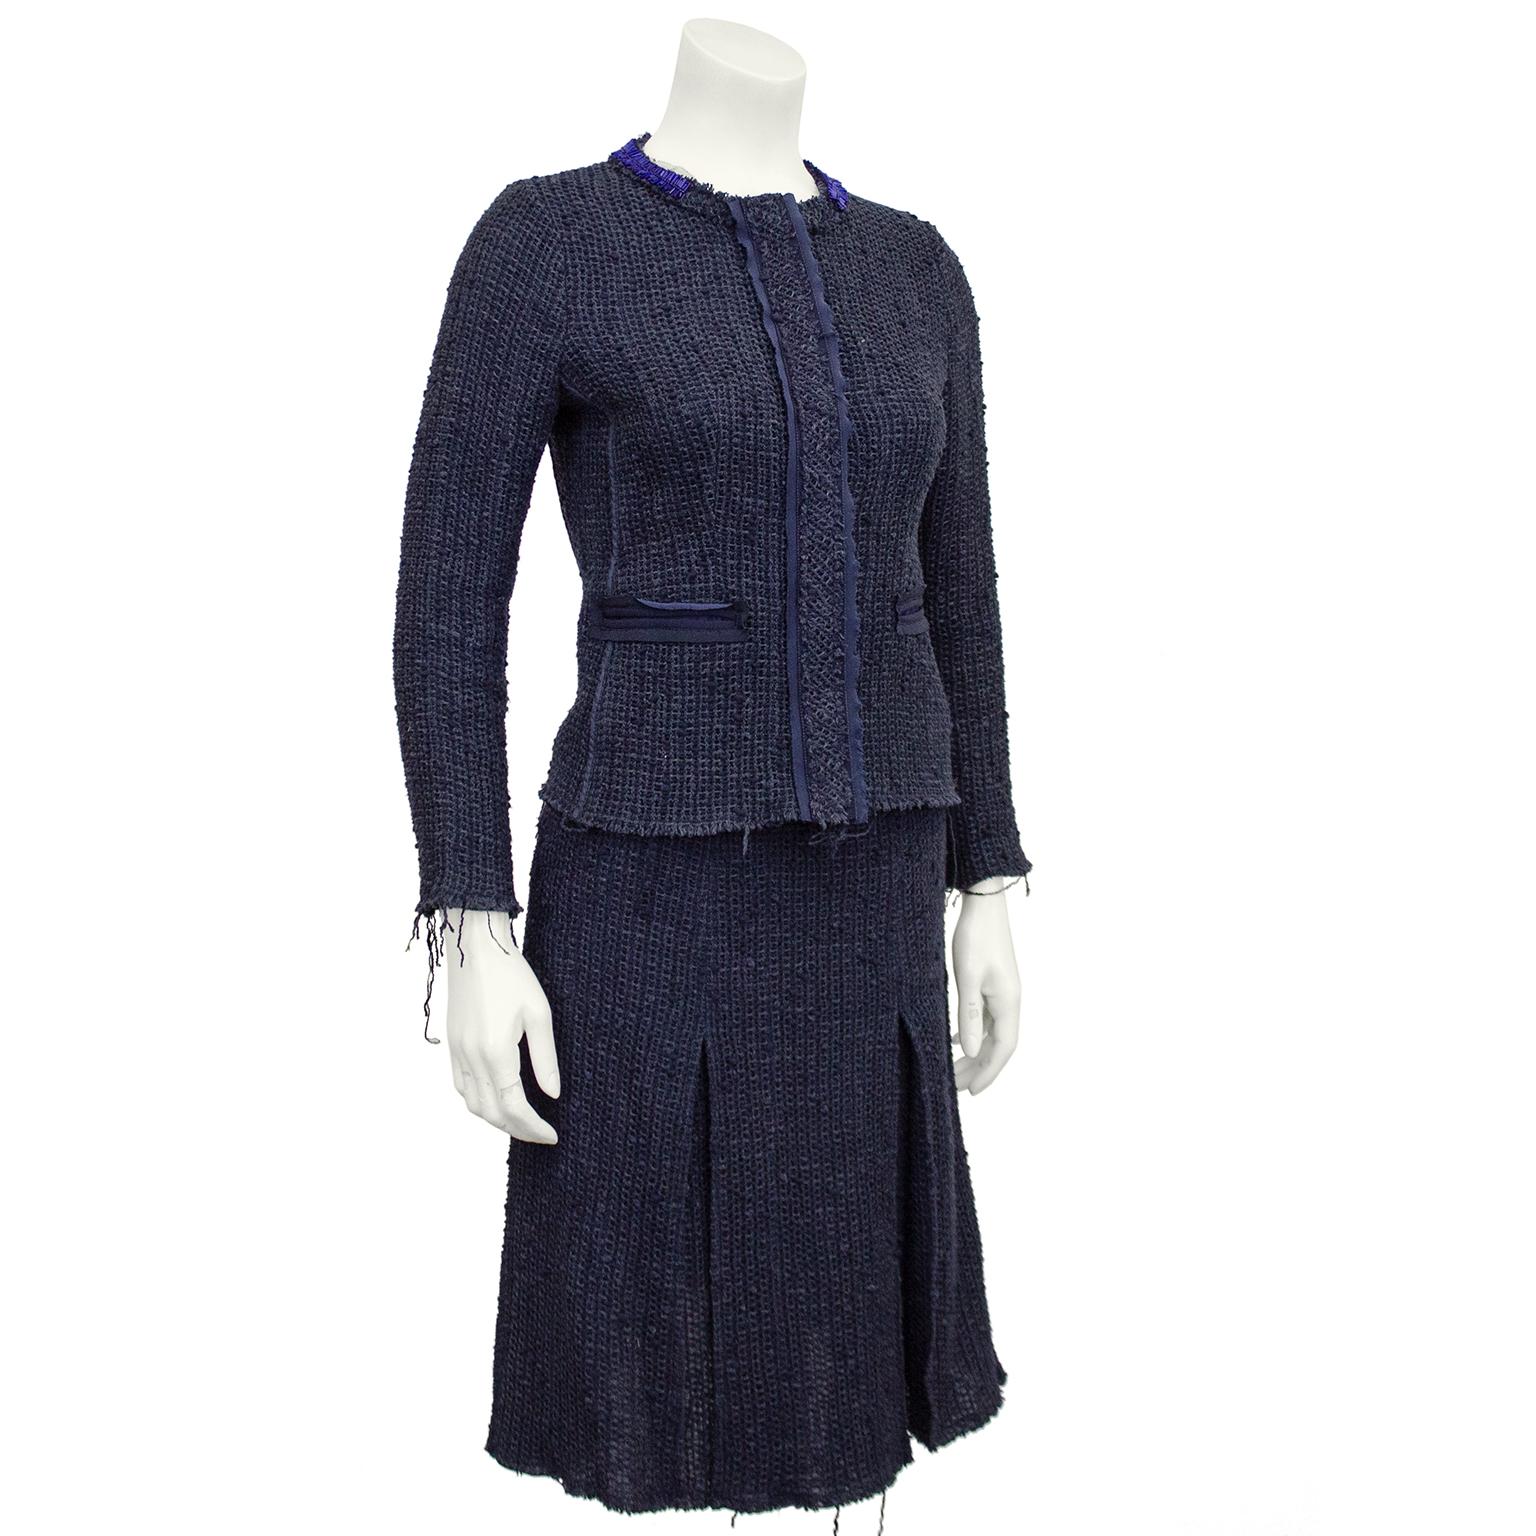 1990s Prada navy blue knit tweed skirt suit. Jacket features royal blue beaded embellished crew neck collar with a ribbon tie at nape of neck, creating the illusion of a beaded necklace over the suit. Two horizontal slit pockets bound in grosgrain